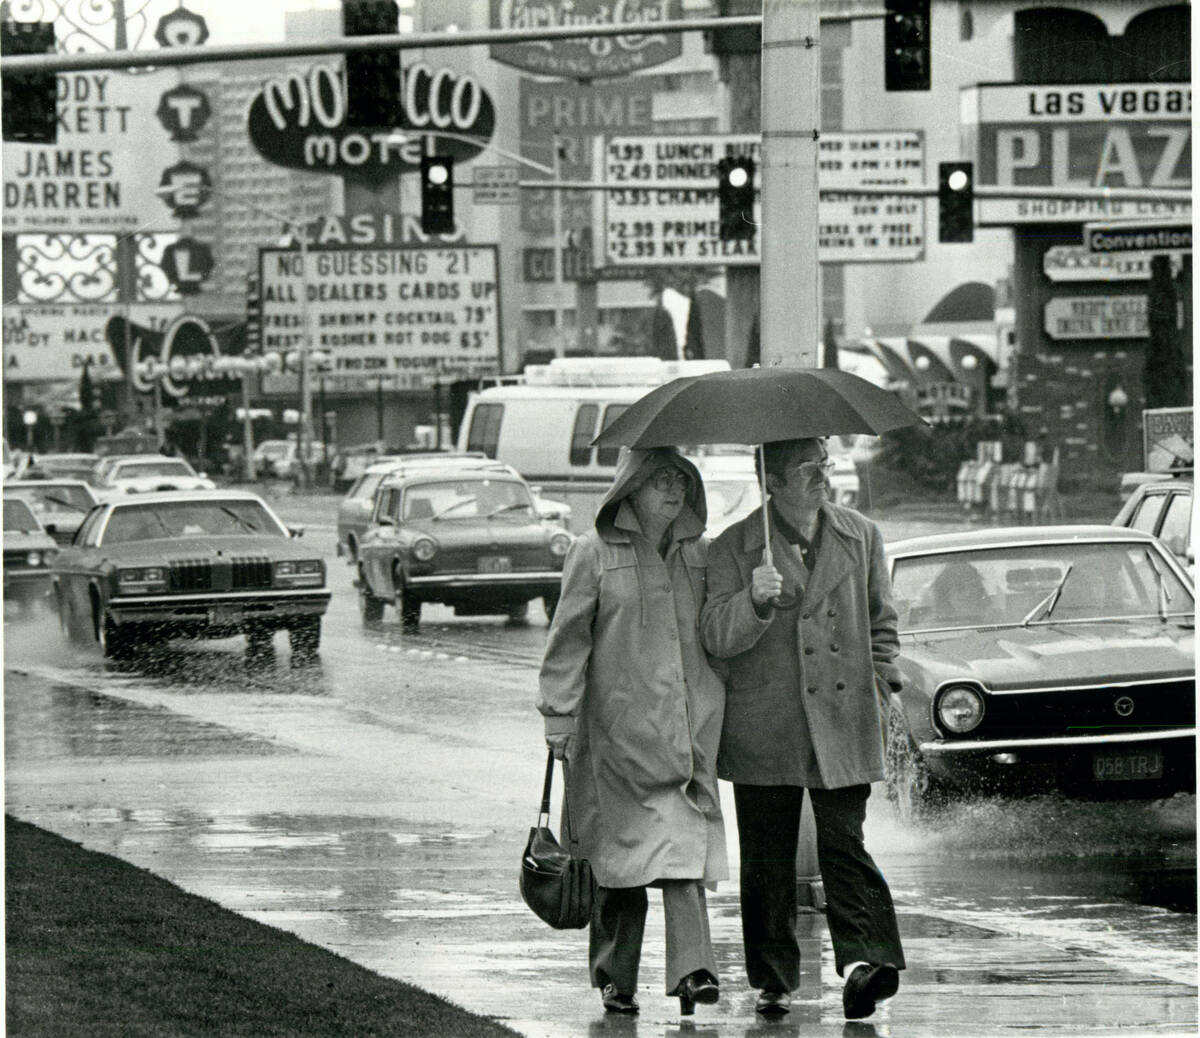 A couple walks past the Stardust hotel on the Las Vegas Strip in 1981. (Las Vegas Review-Journa ...